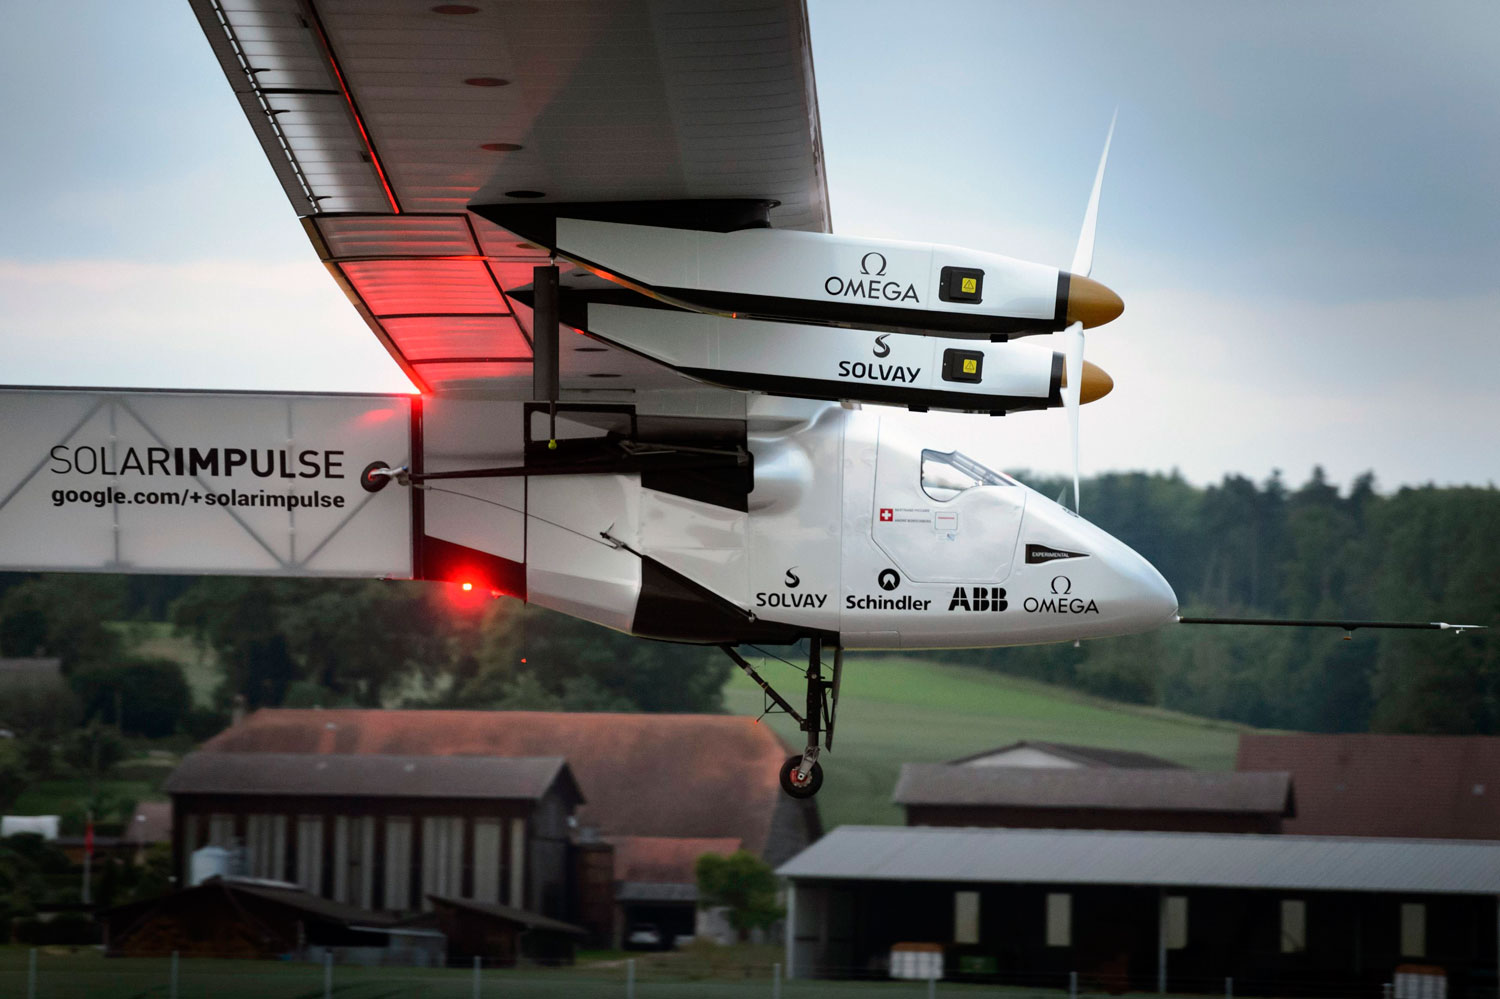 Solar Impulse 2 takes off during its maiden flight from Payerne on June 2, 2014.